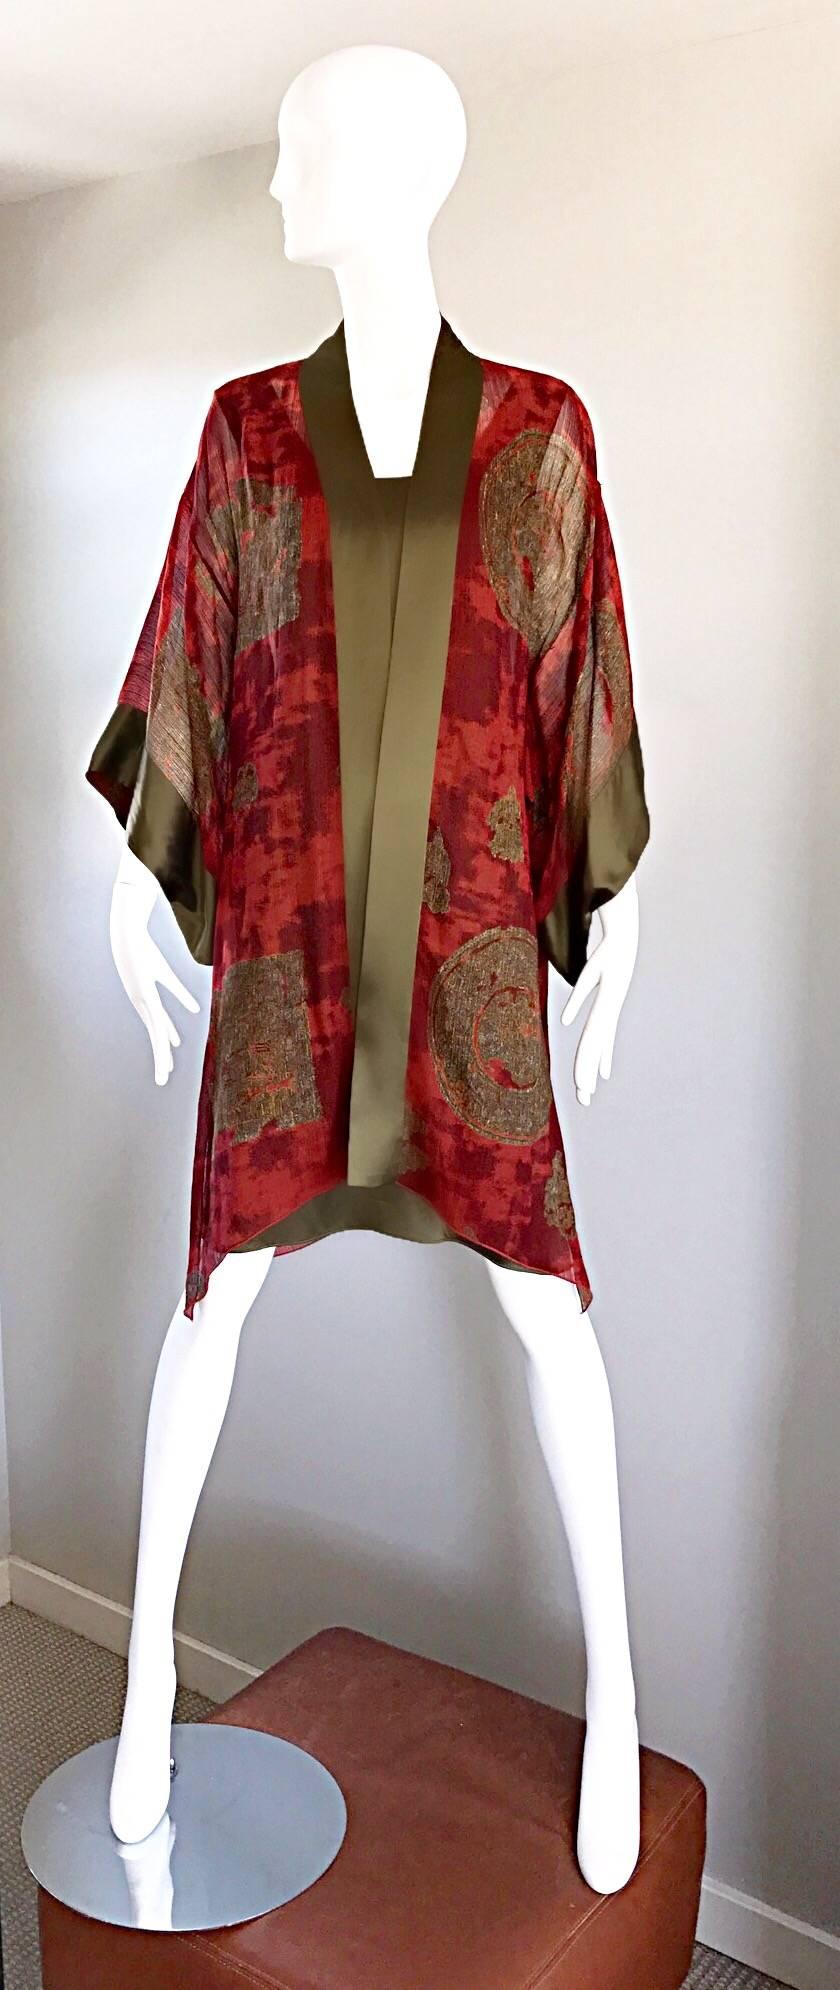 Amazing vintage 70s HOLLY'S HARP 1970s red, burgundy and chartreuse green silk kimono AND dress! Silk chiffon hand painted kimono features chartreuse satin trims, and dolman sleeves. Simple cut chartreuse green silk dress is also very forgiving.